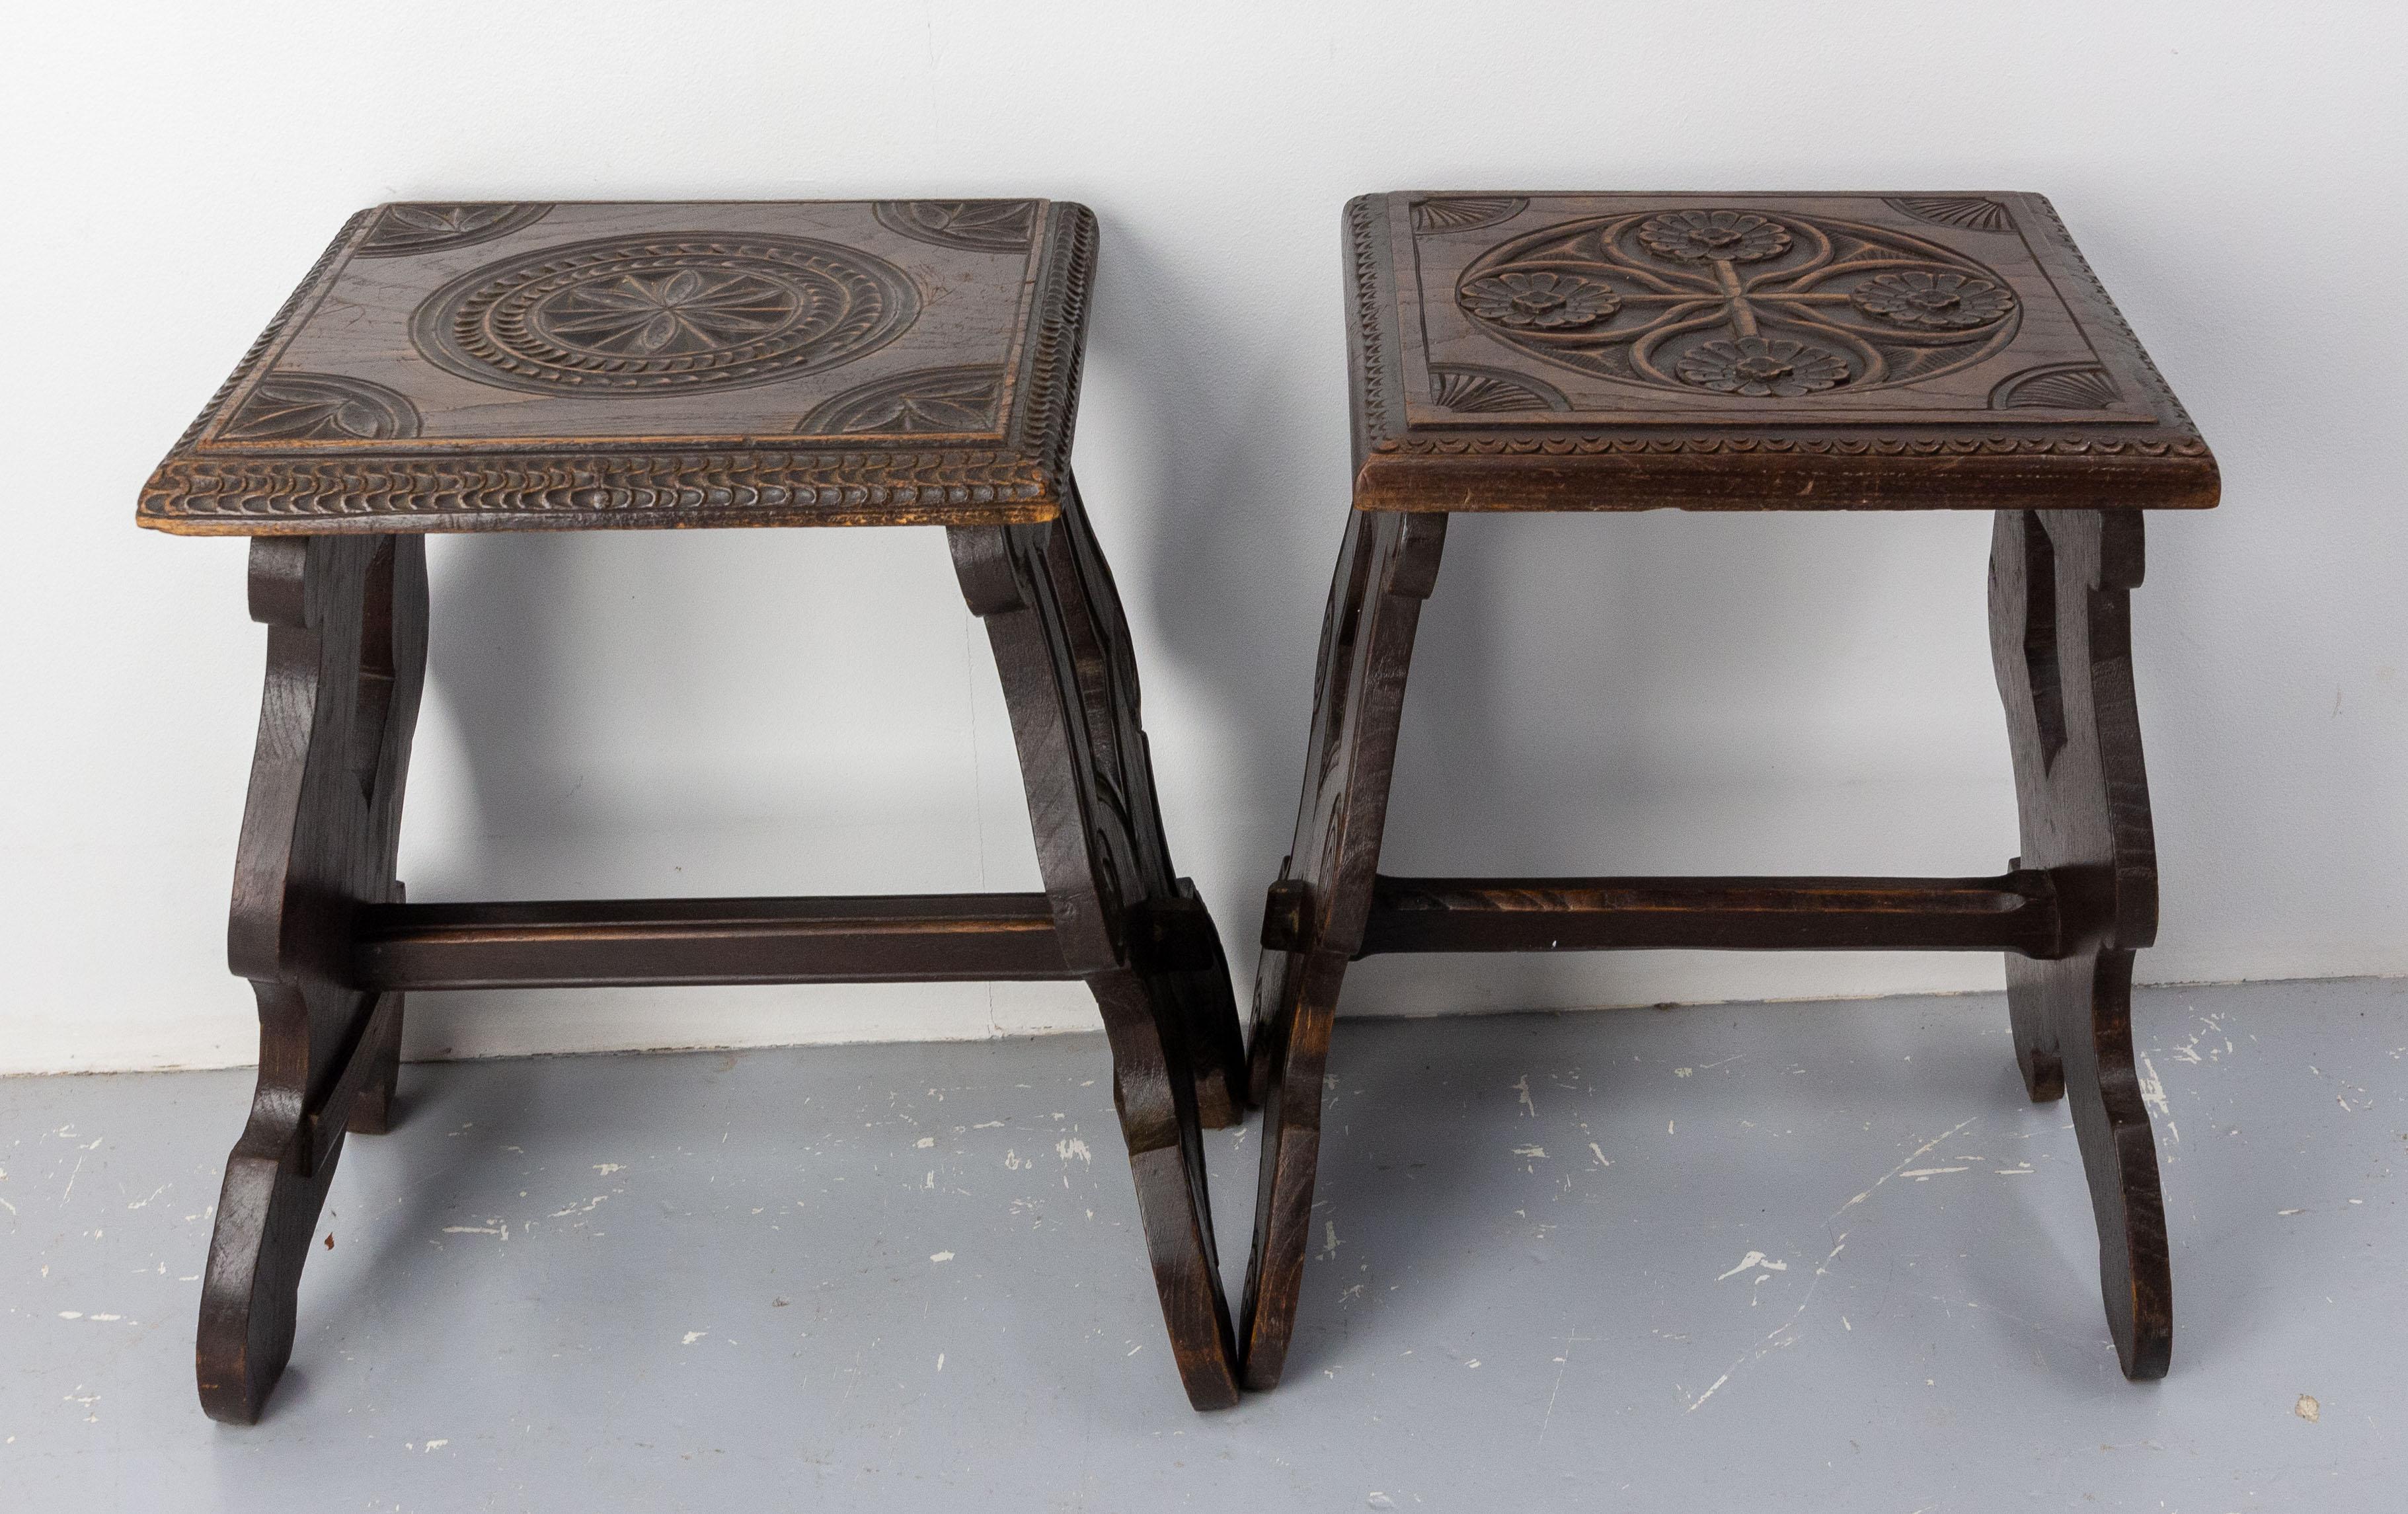 French Massive Chestnut Pair of Stools from Britanny, Late 19th Century For Sale 1